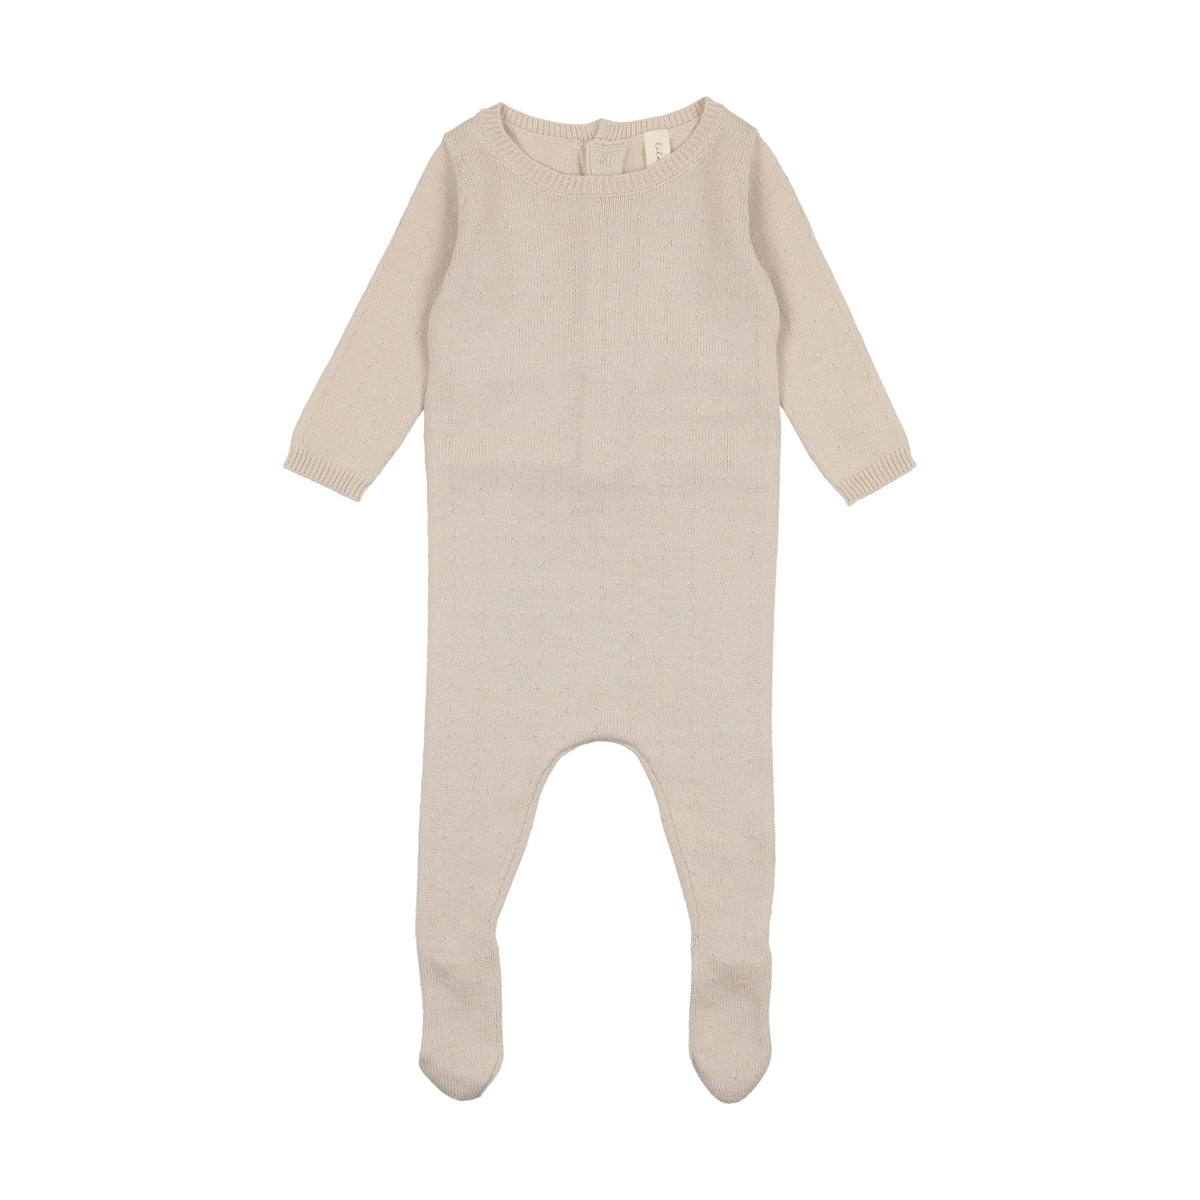 DOTTED KNIT FOOTIE – Lil Legs Baby